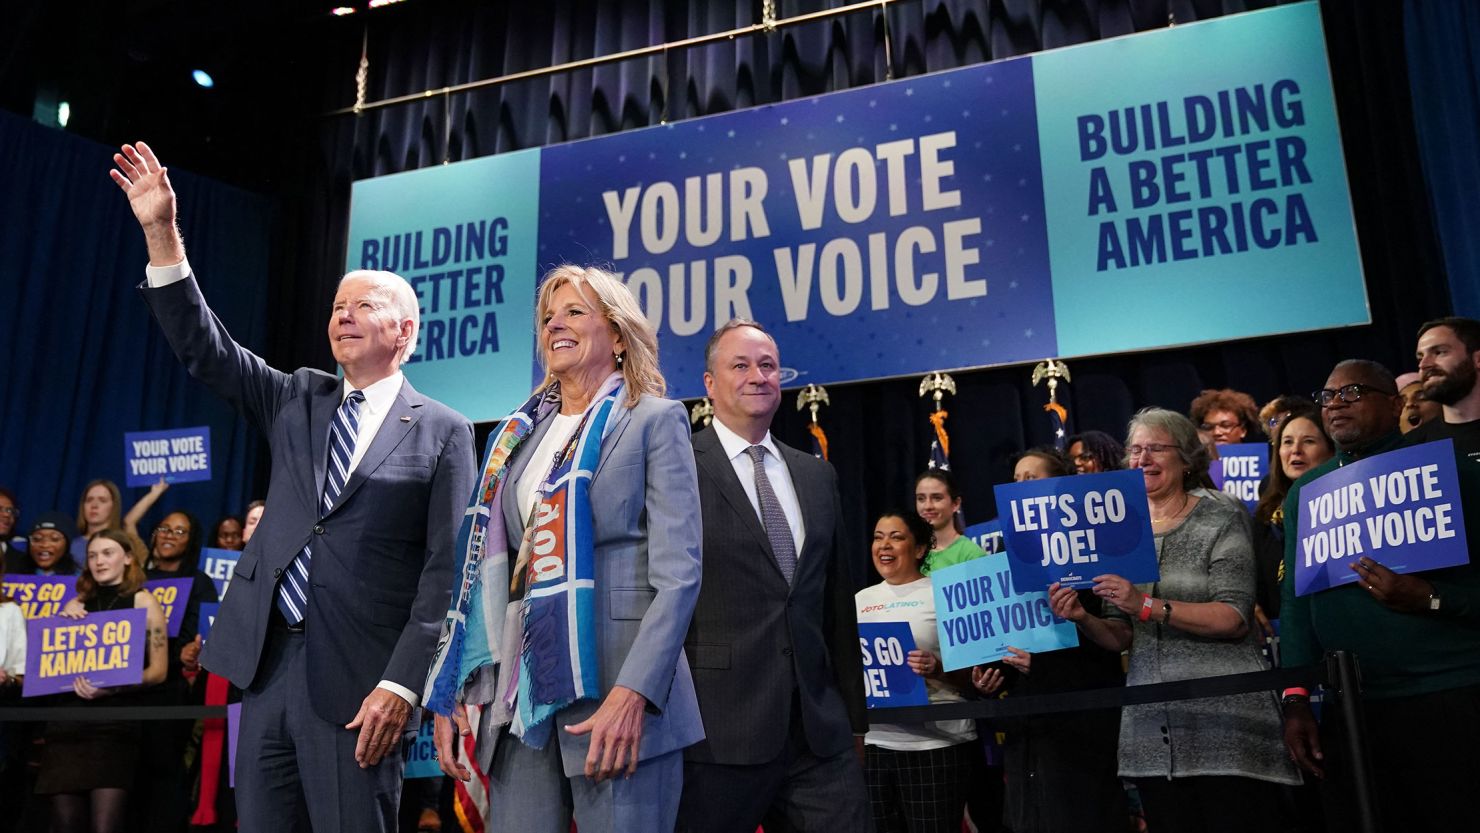 US President Joe Biden, first lady Jill Biden and second gentleman Doug Emhoff attend an event hosted by the Democratic National Committee to thank campaign workers, at Howard Theatre in Washington, DC, November 10, 2022. 